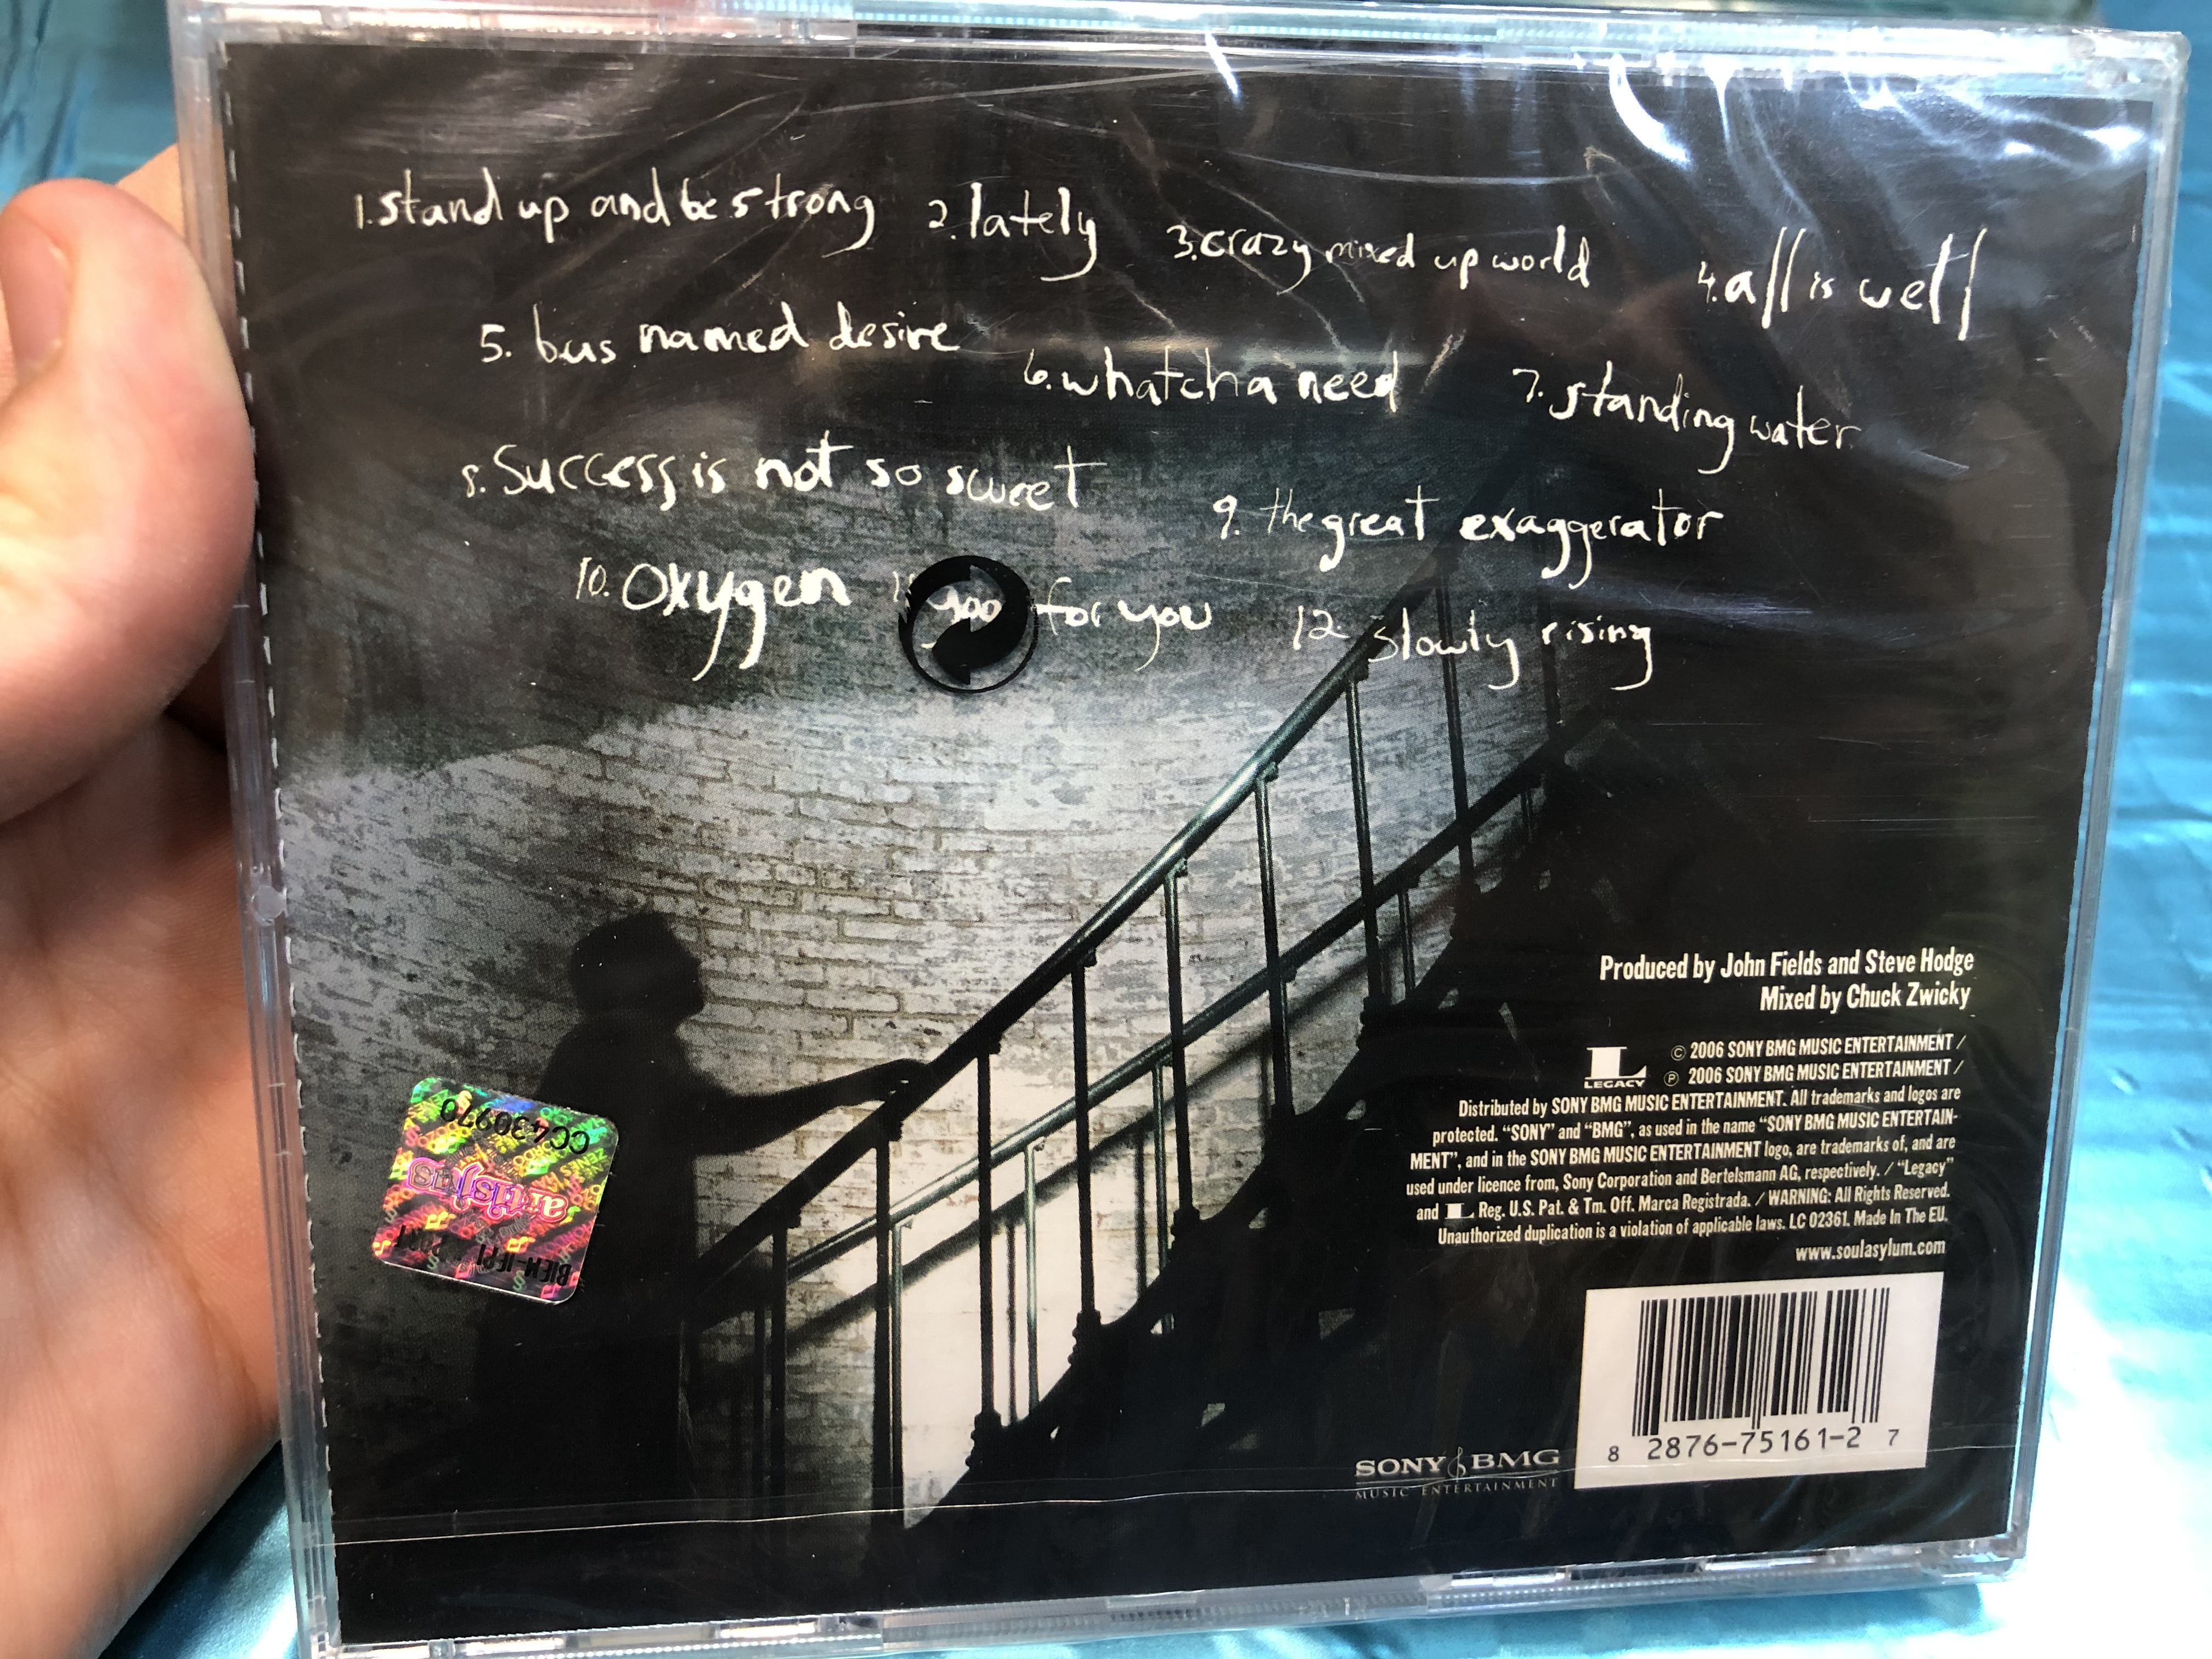 soul-asylum-the-silver-lining-the-brand-new-studio-album-featuring-stand-up-and-be-strong-and-lately-legacy-audio-cd-2006-82876751612-3-.jpg